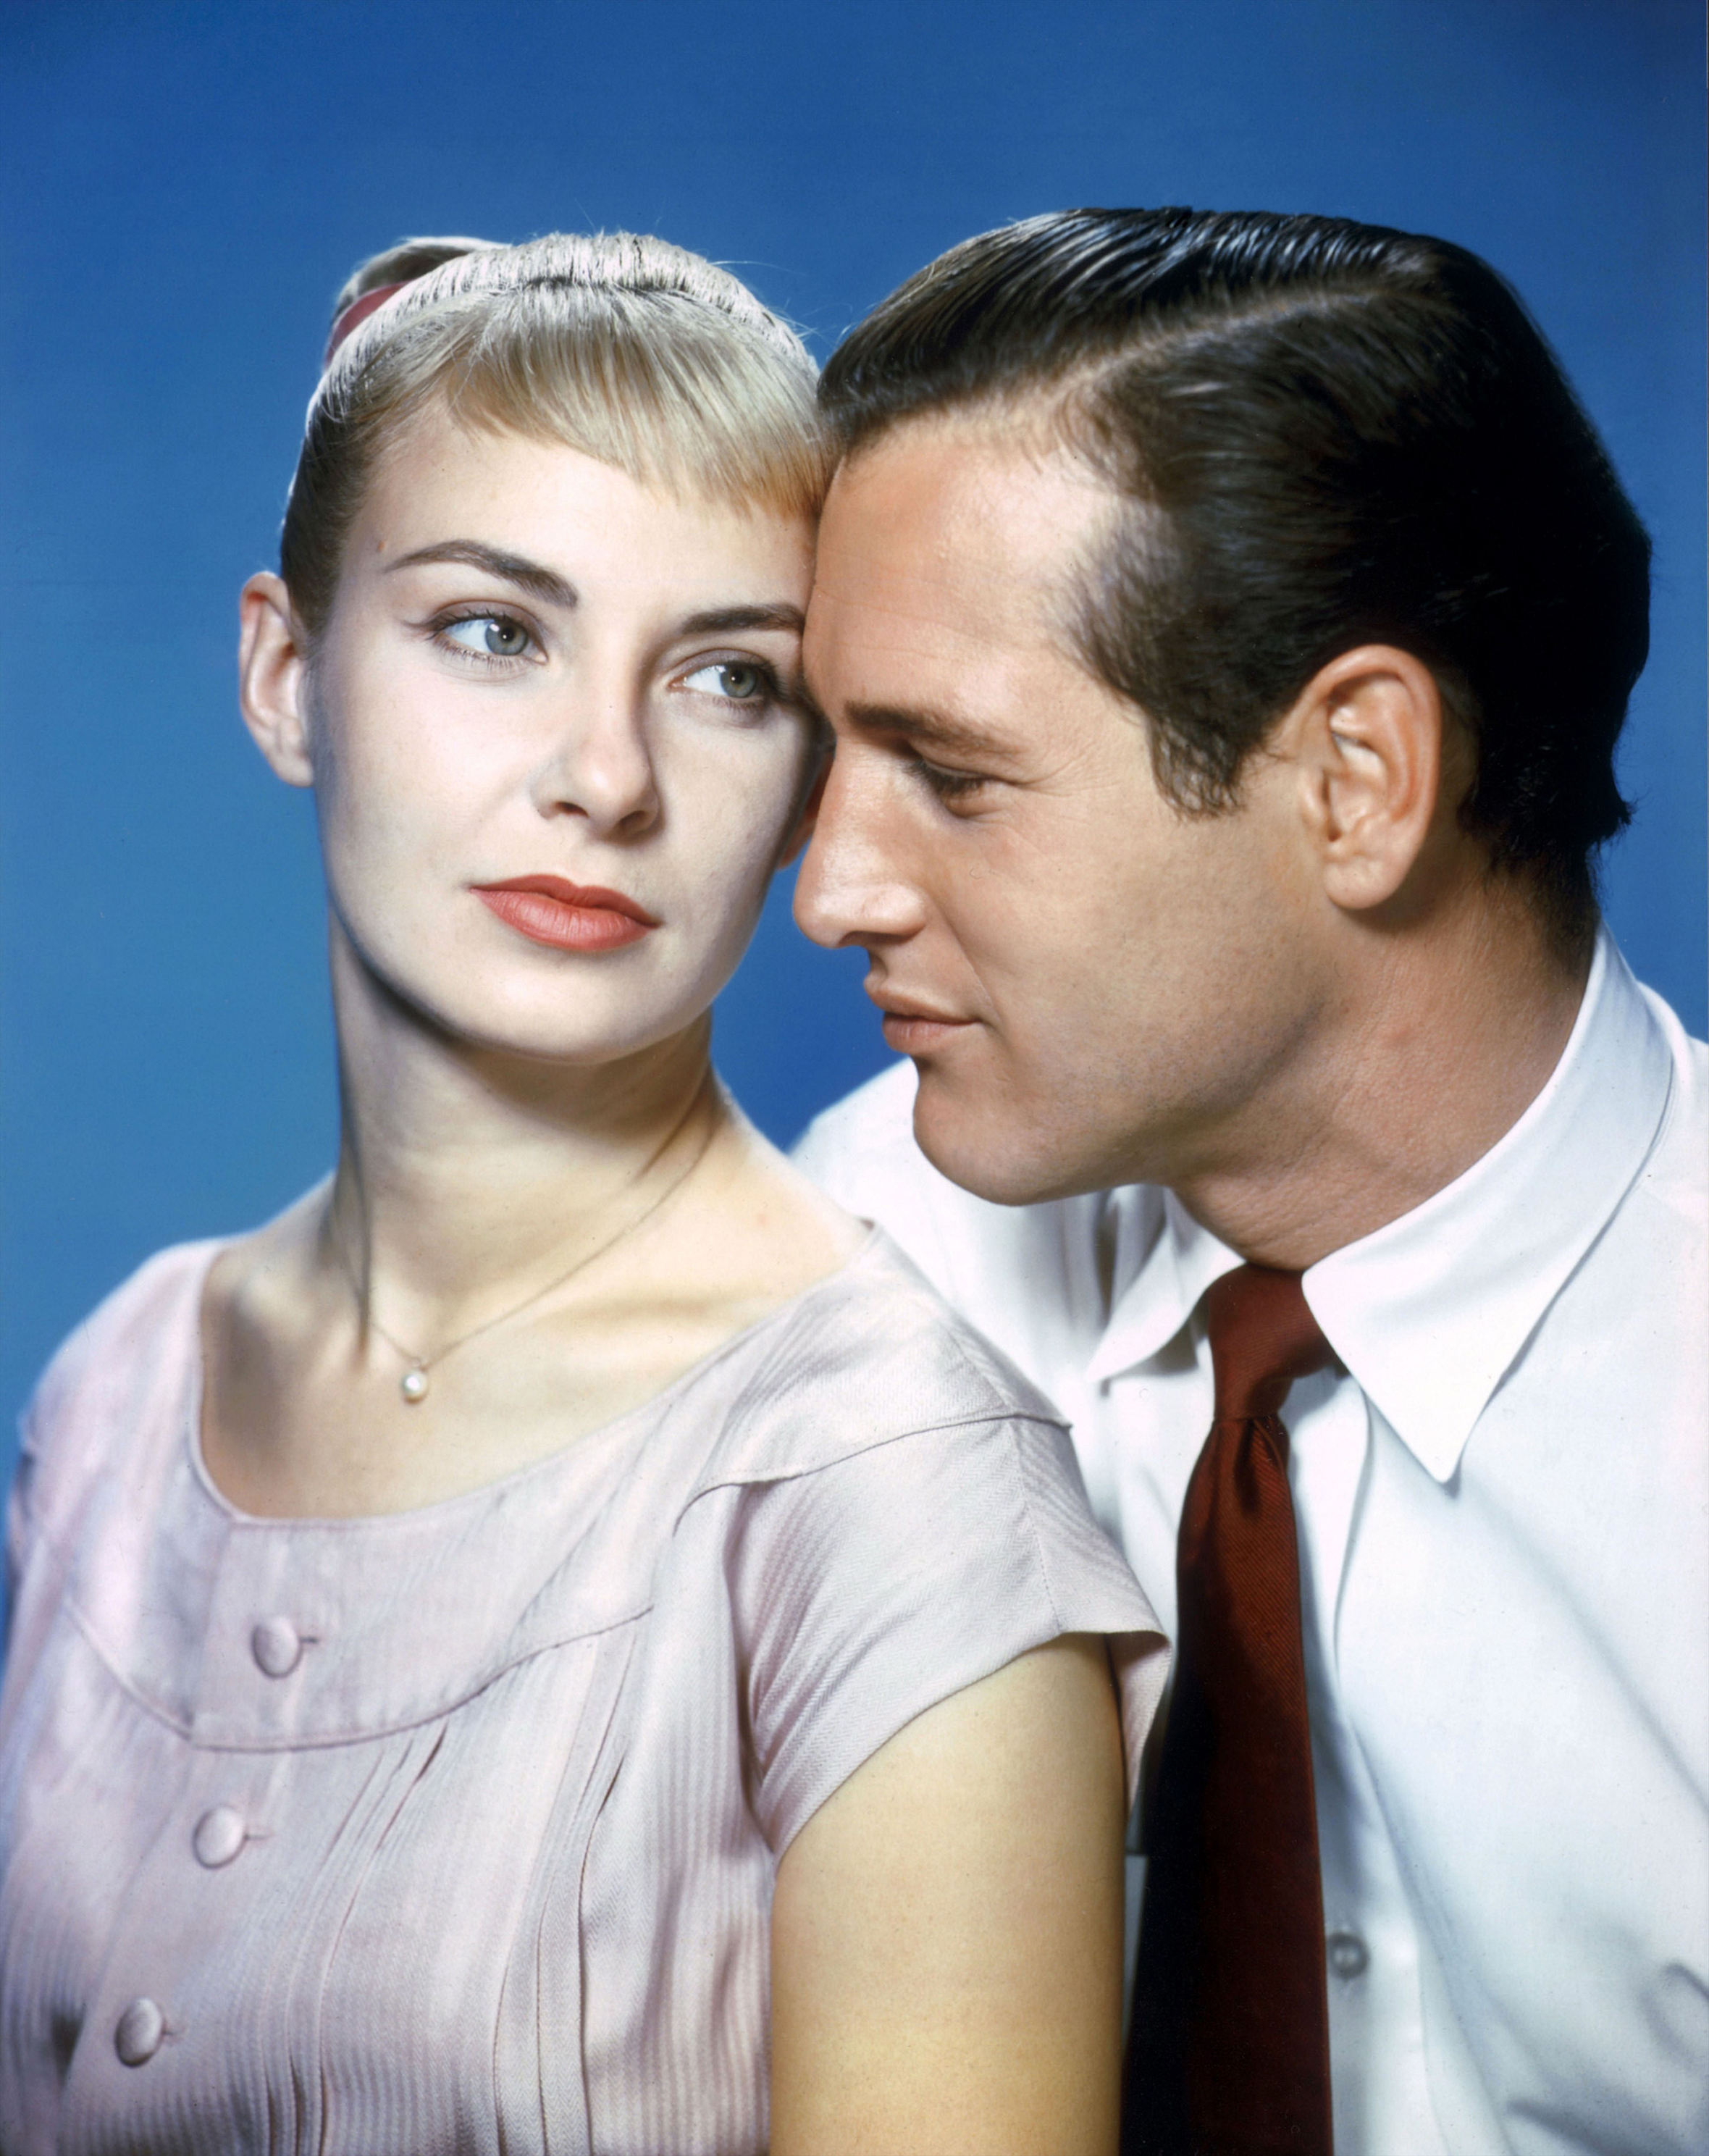 Joanne Woodward and Paul Newman in 1958 (Alamy/PA)